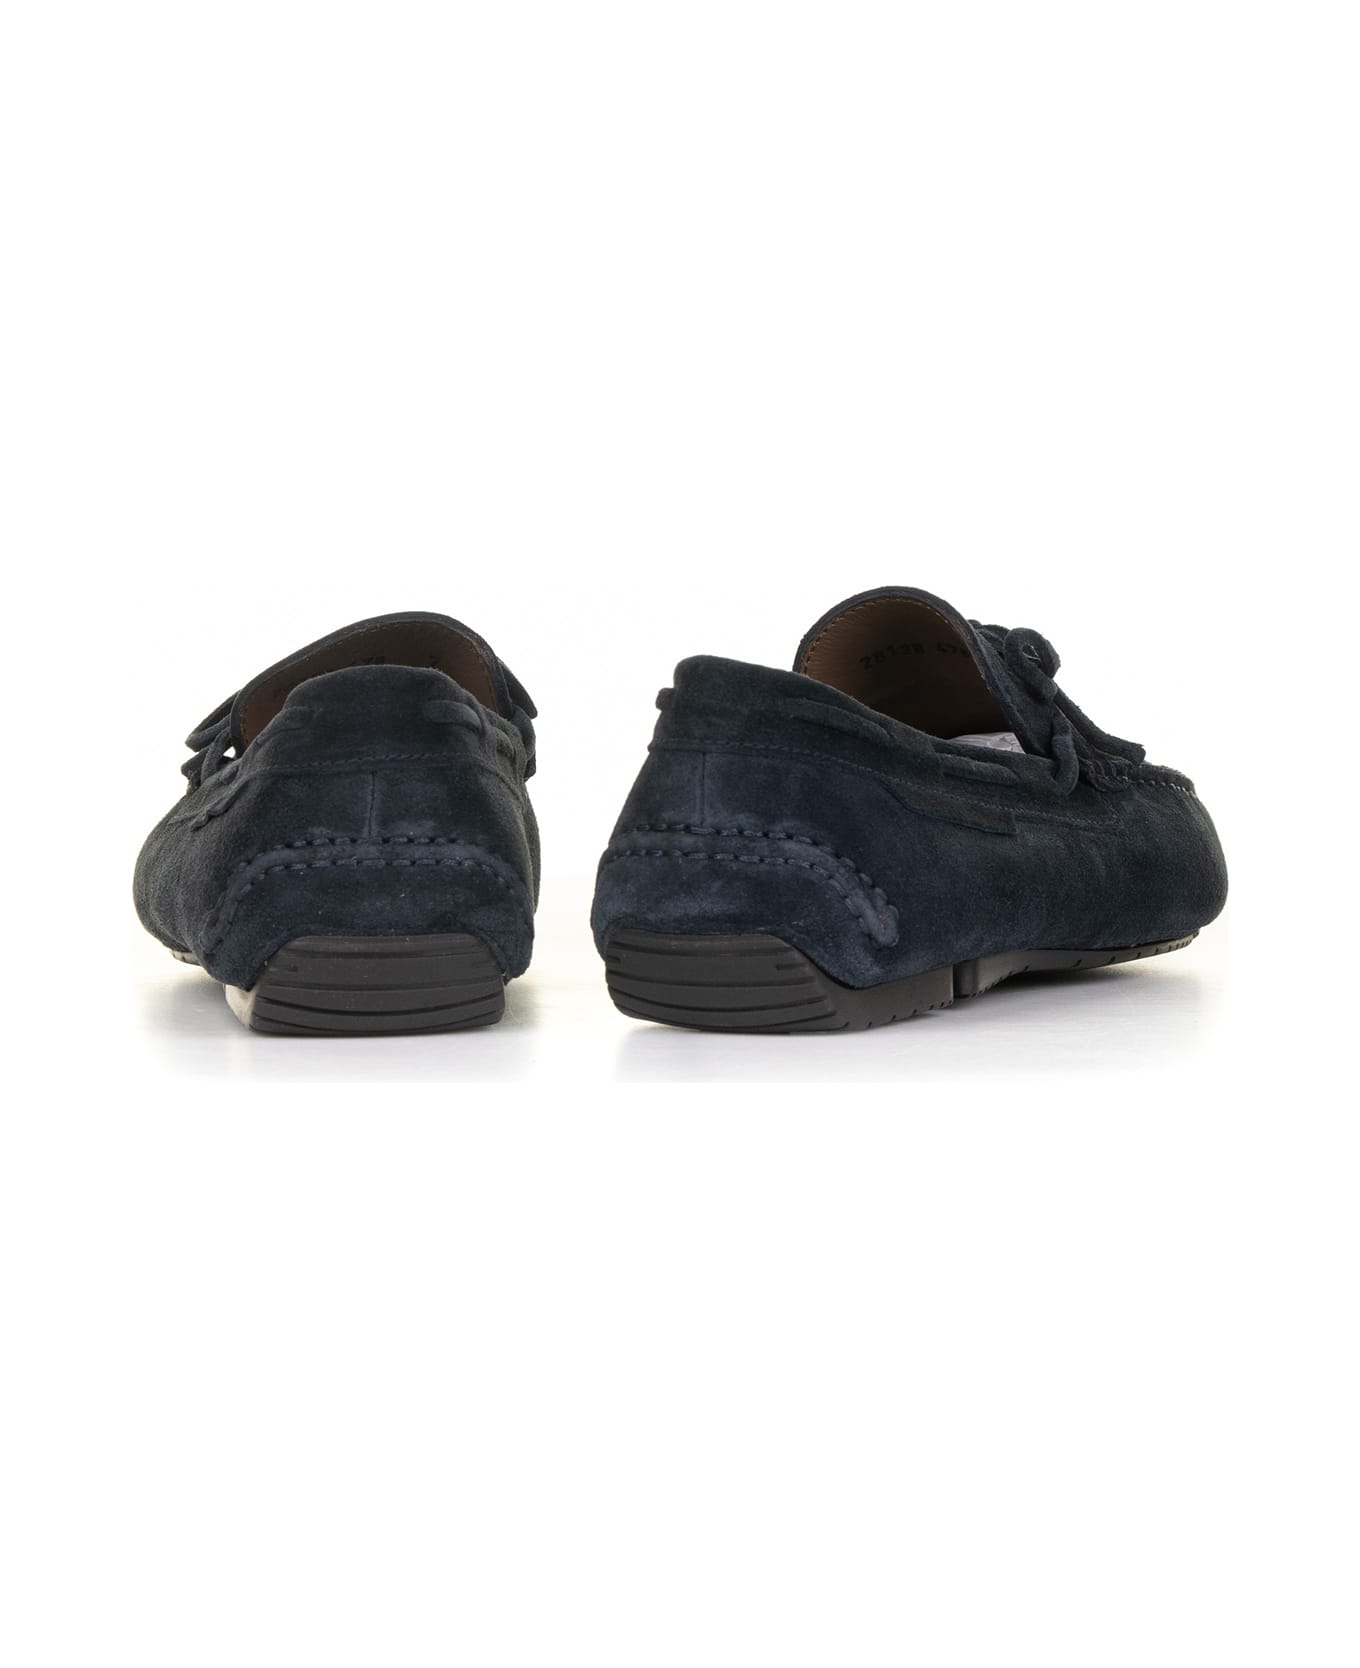 Fratelli Rossetti One Moccasin In Navy Blue Suede - MARINE